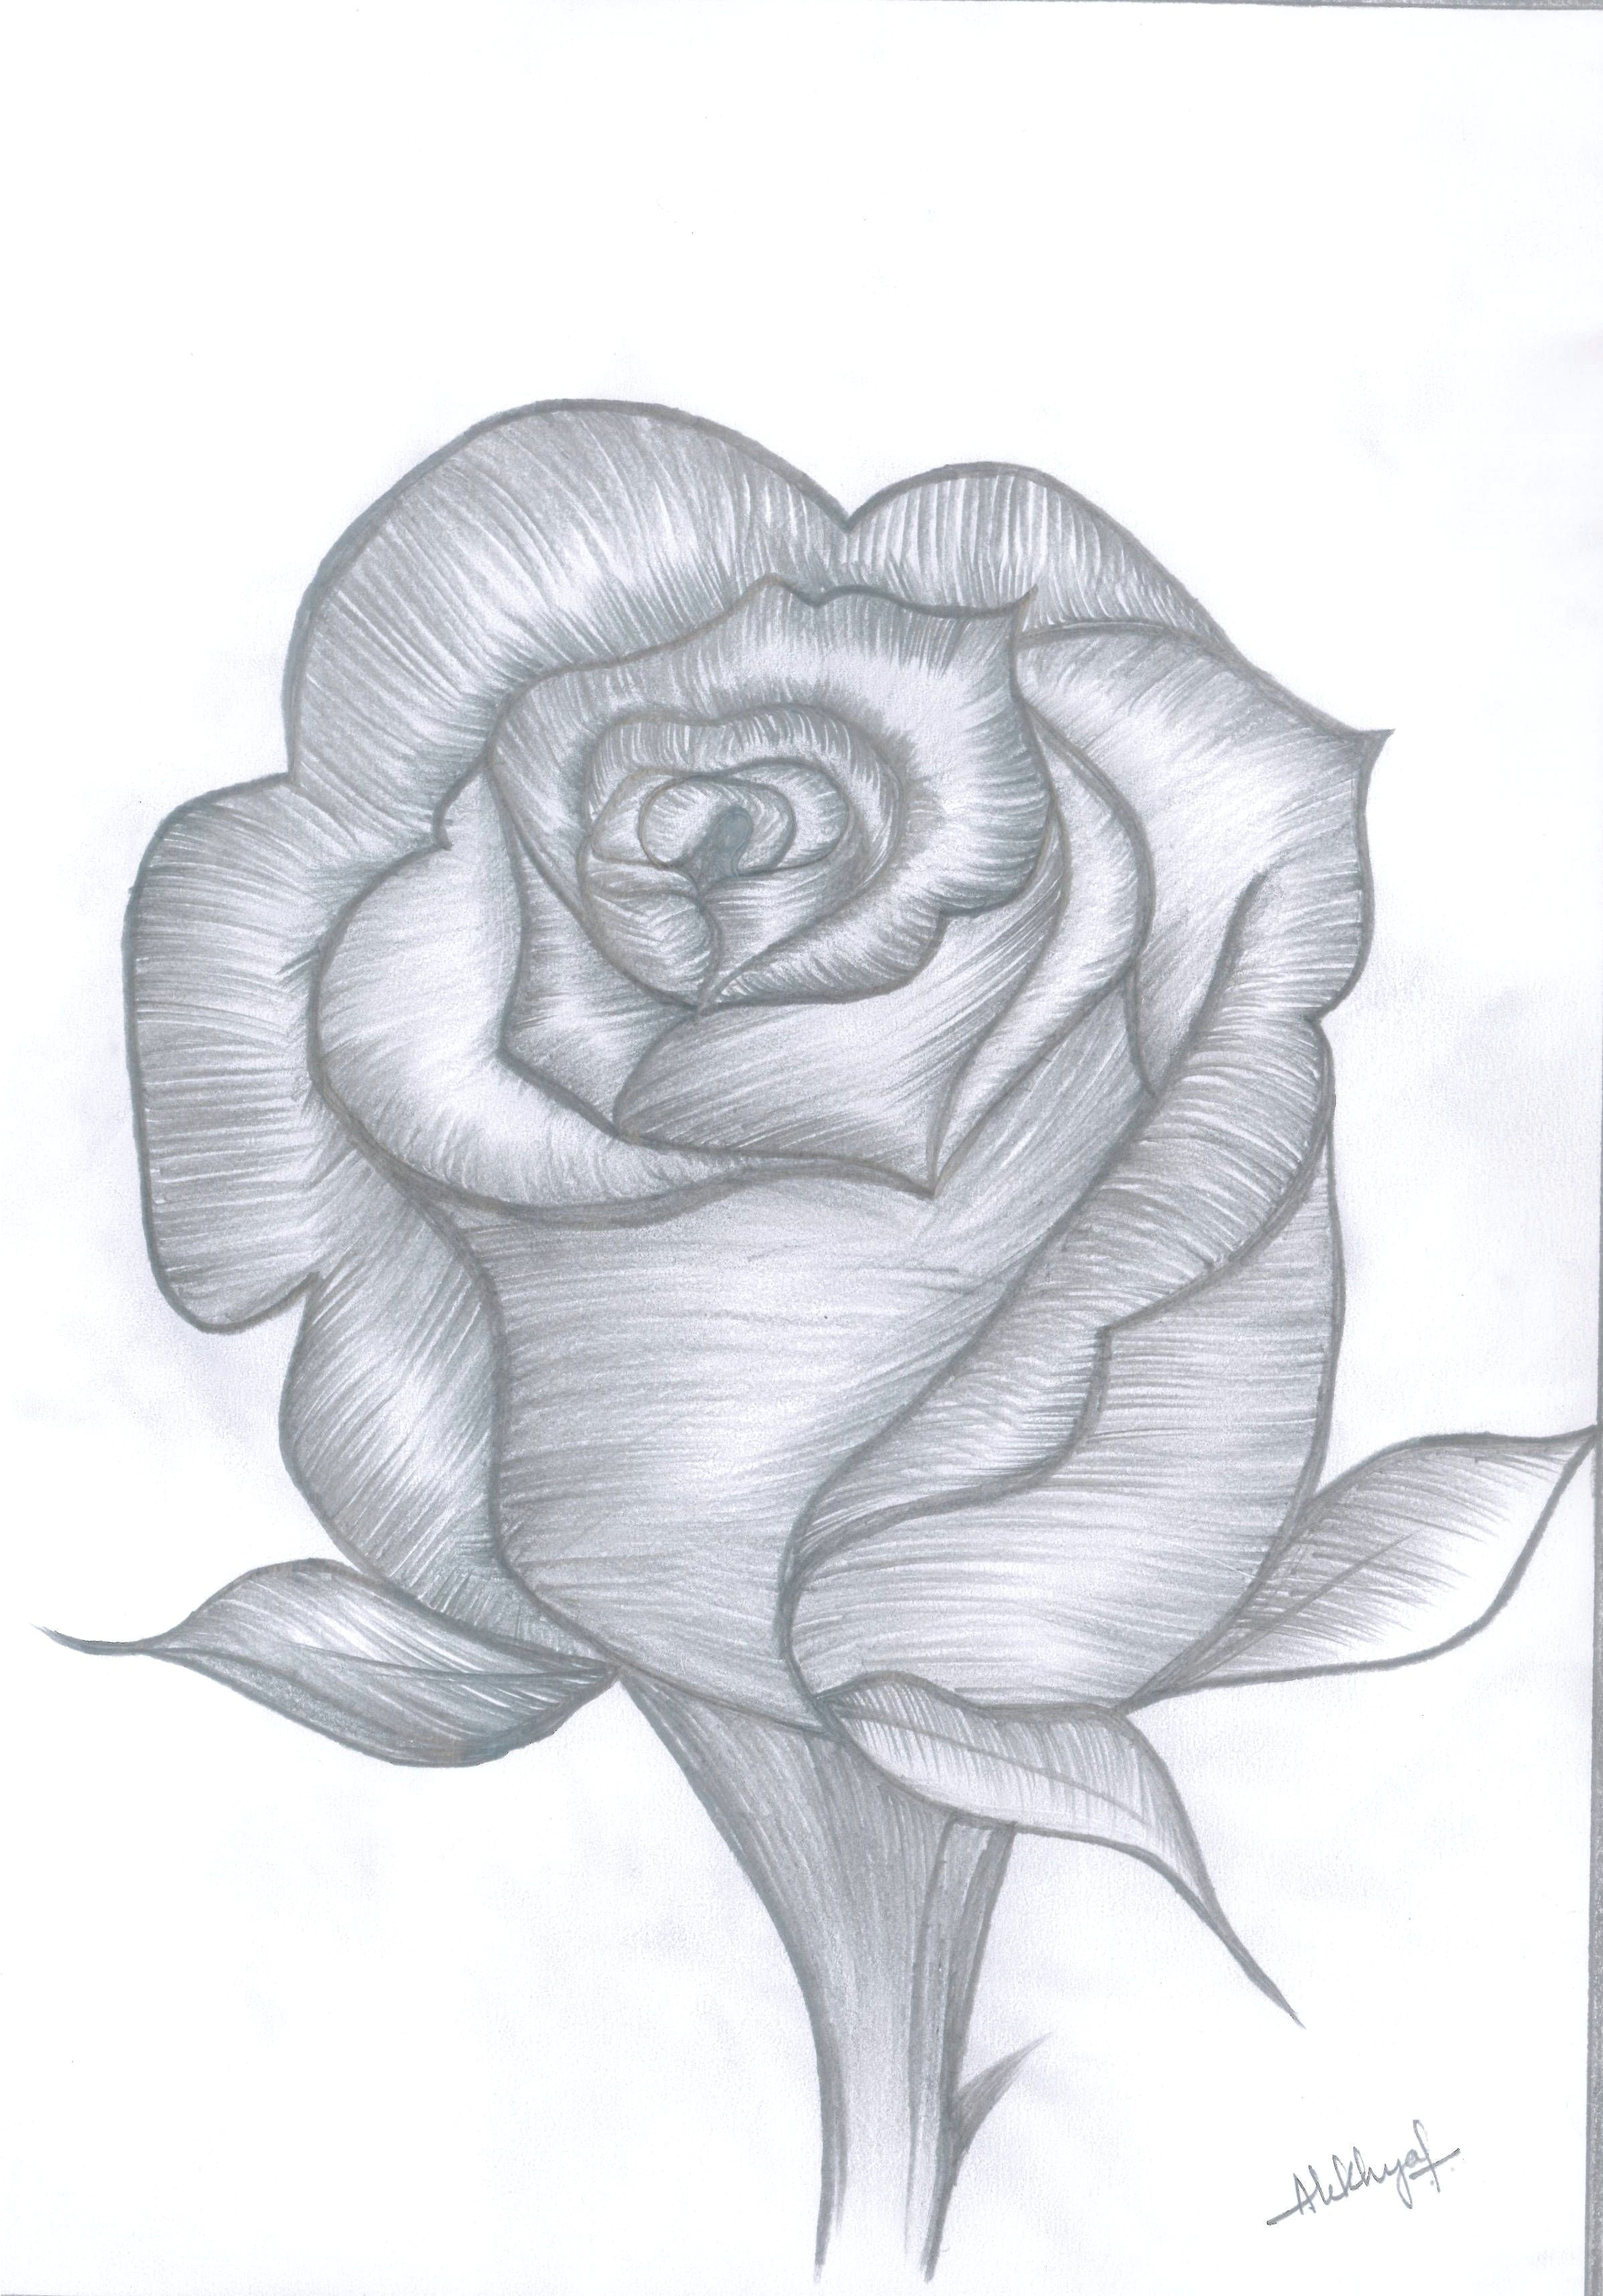 Images Of Pencil Drawings Of Roses Rose Bud Drawings In 2019 Pinterest Draw Pencil Drawings and